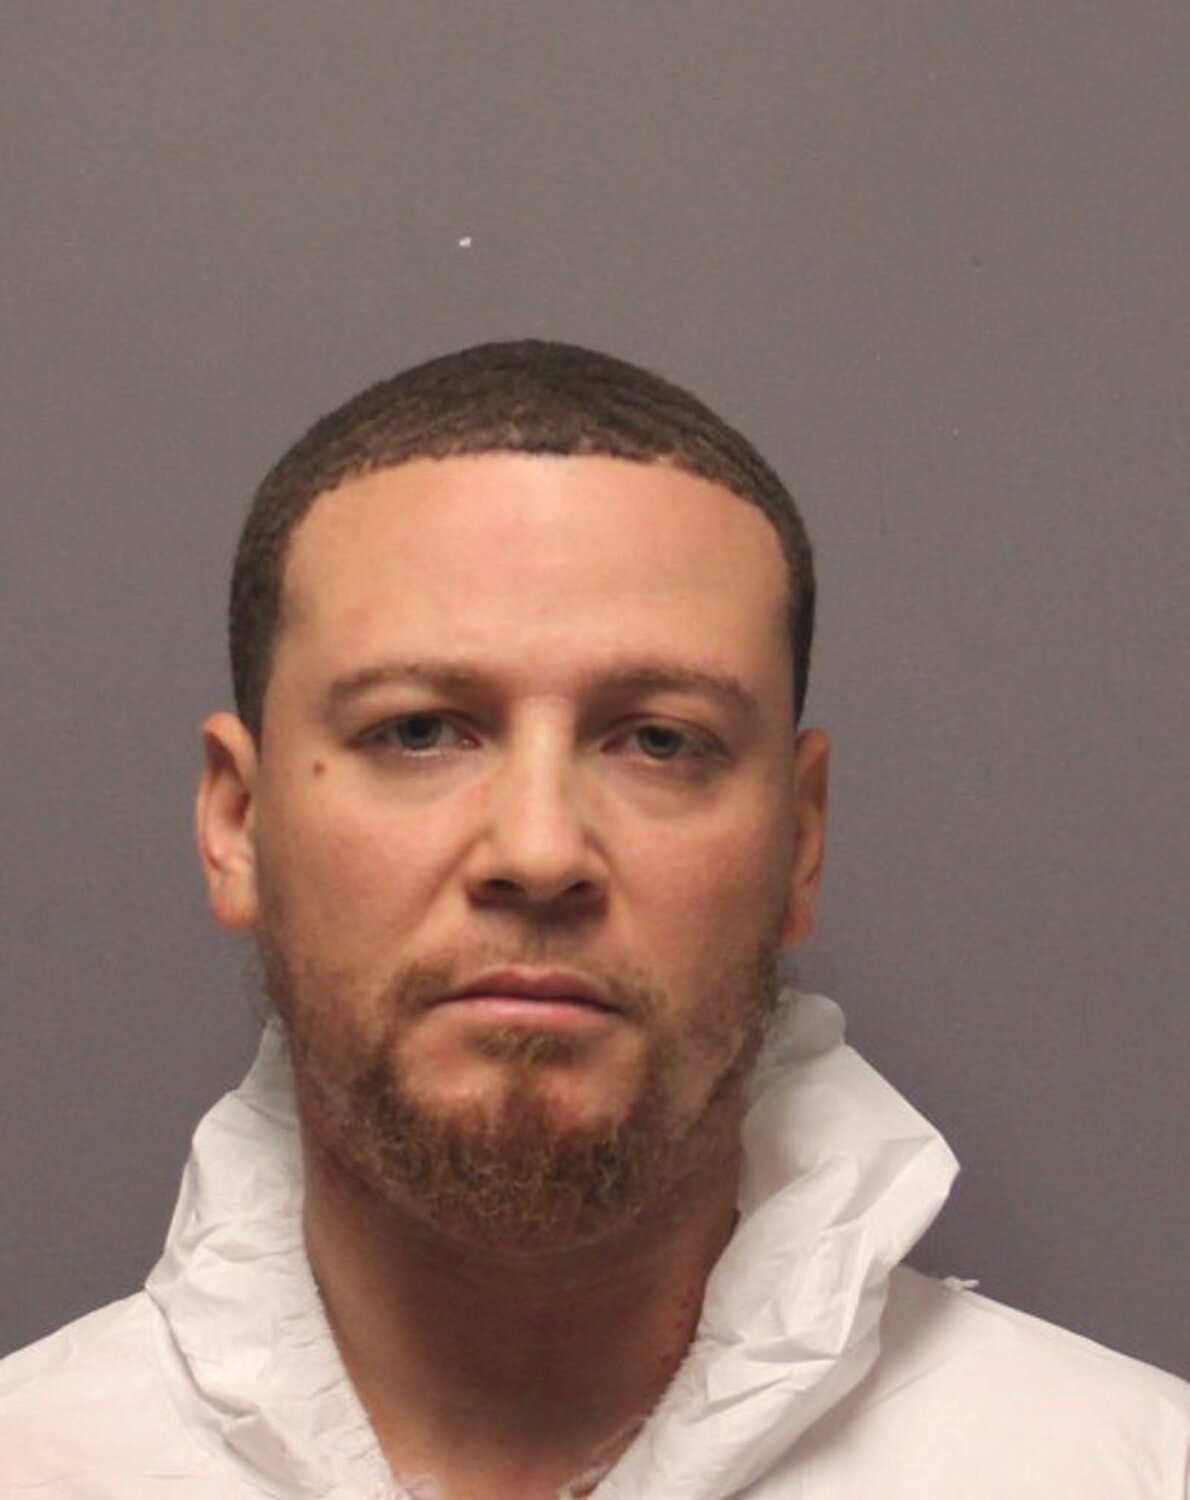 CHARGED: Michael A. Jones, 33, of 25 Queen St., Cranston, was arrested and charged following the “accidental” shooting of his four-year-old son on Halloween morning. (Photo courtesy Cranston Police)